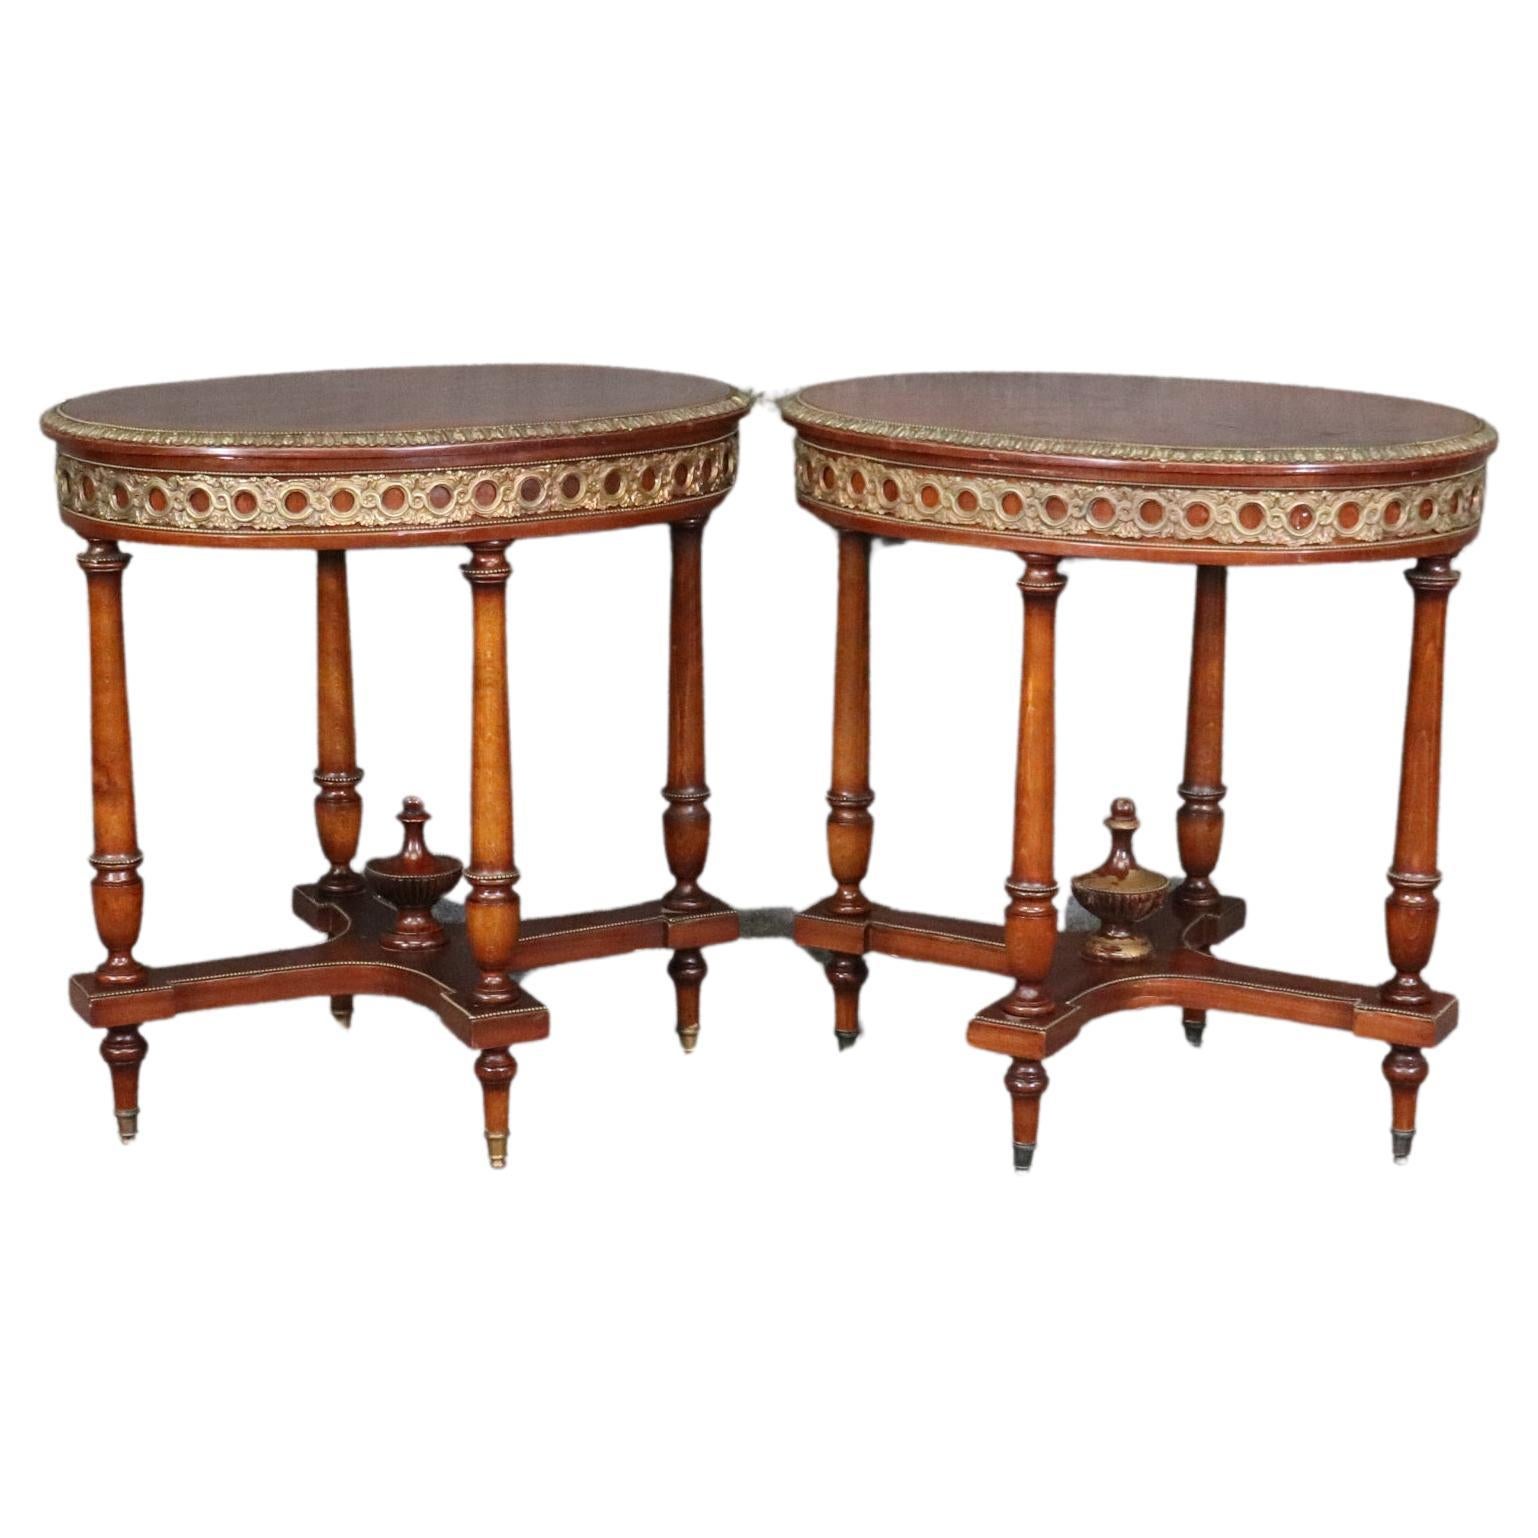 Companion Pair of Bronze Ormolu Mounted French Louis XVI End Tables